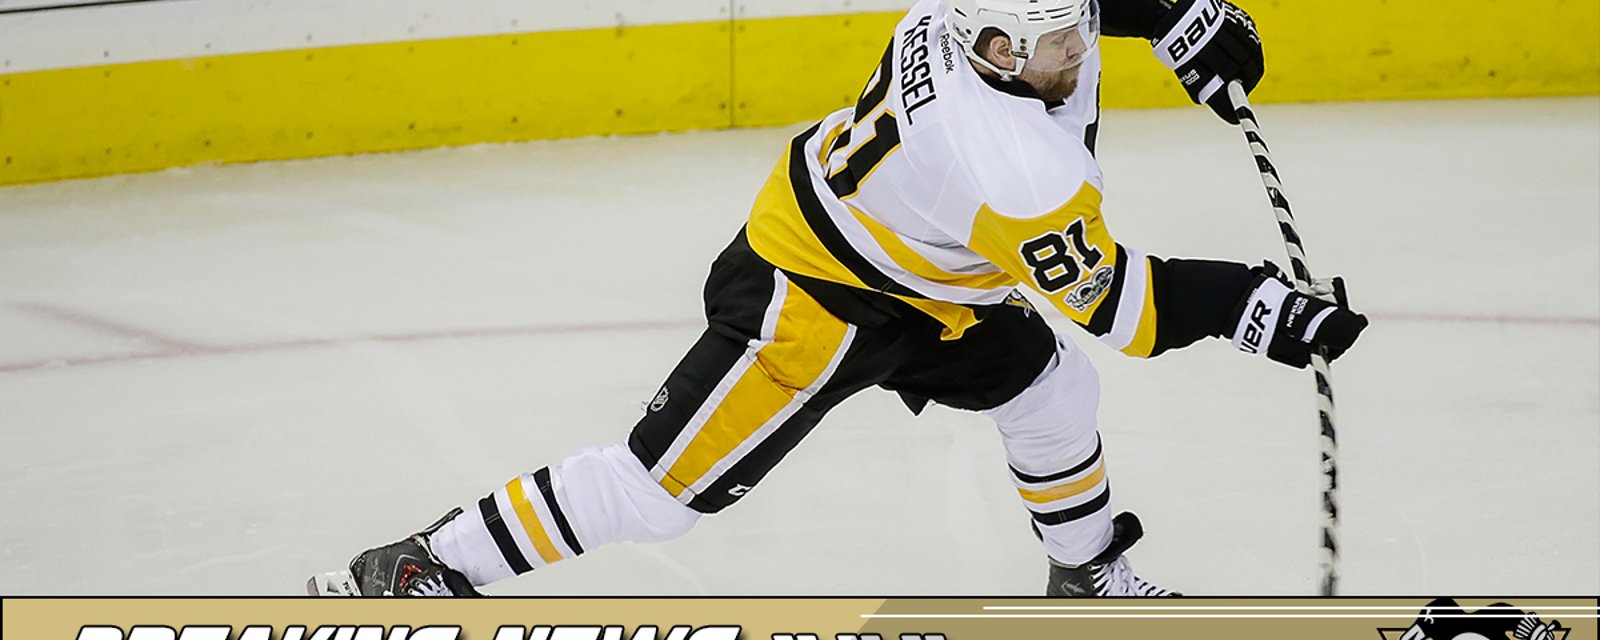 BREAKING: HBK reunion for Pens in game 6?